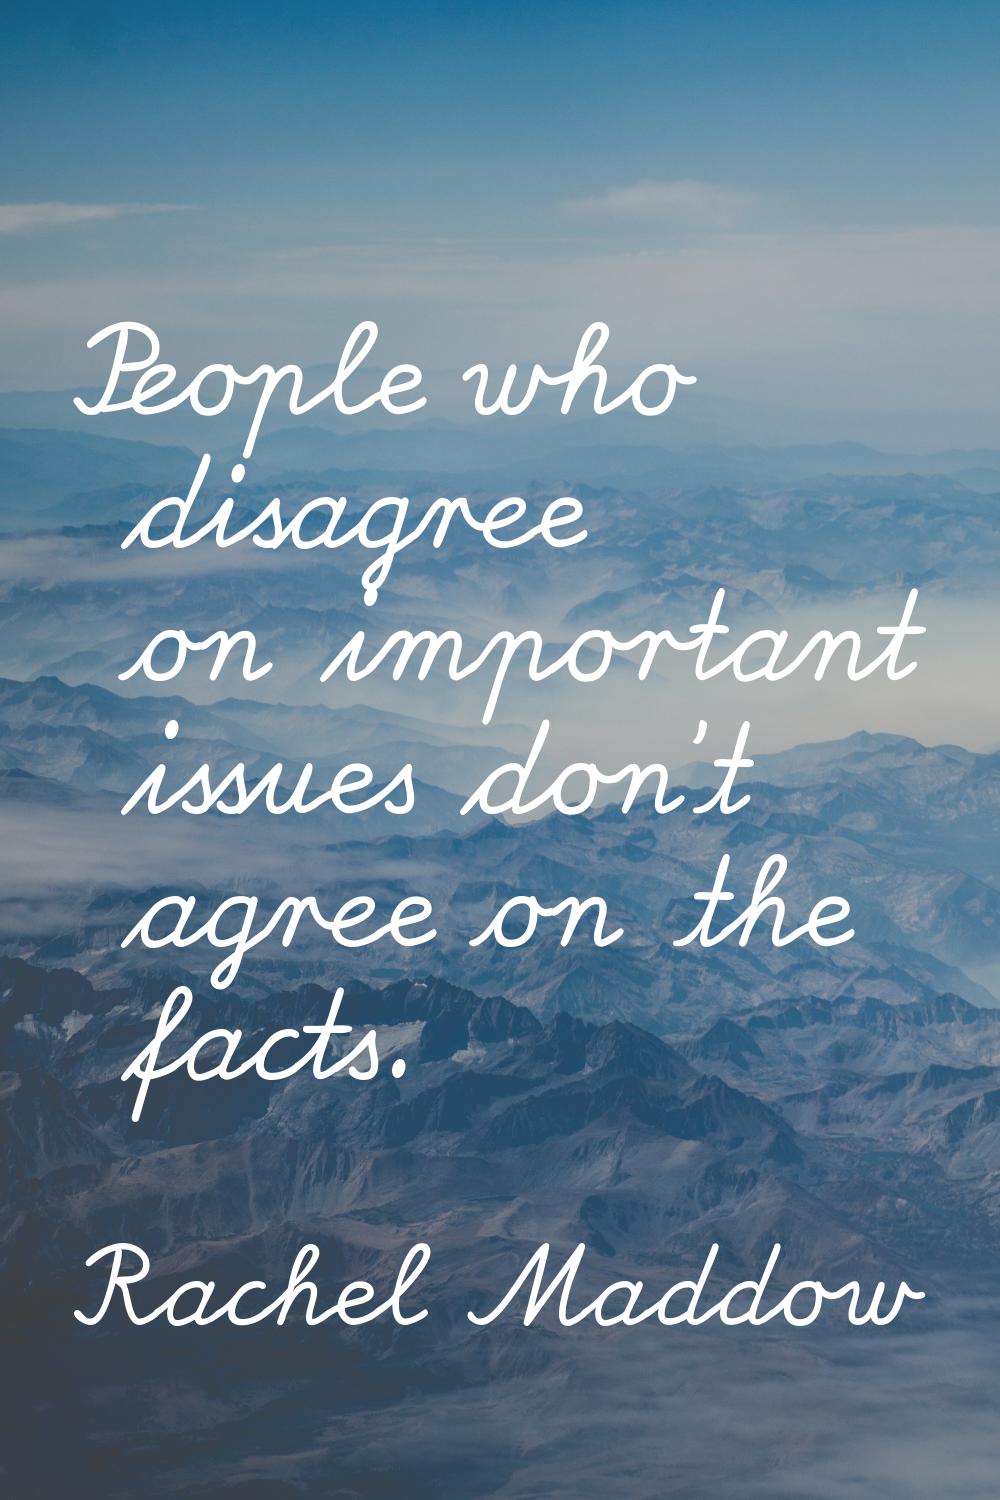 People who disagree on important issues don't agree on the facts.